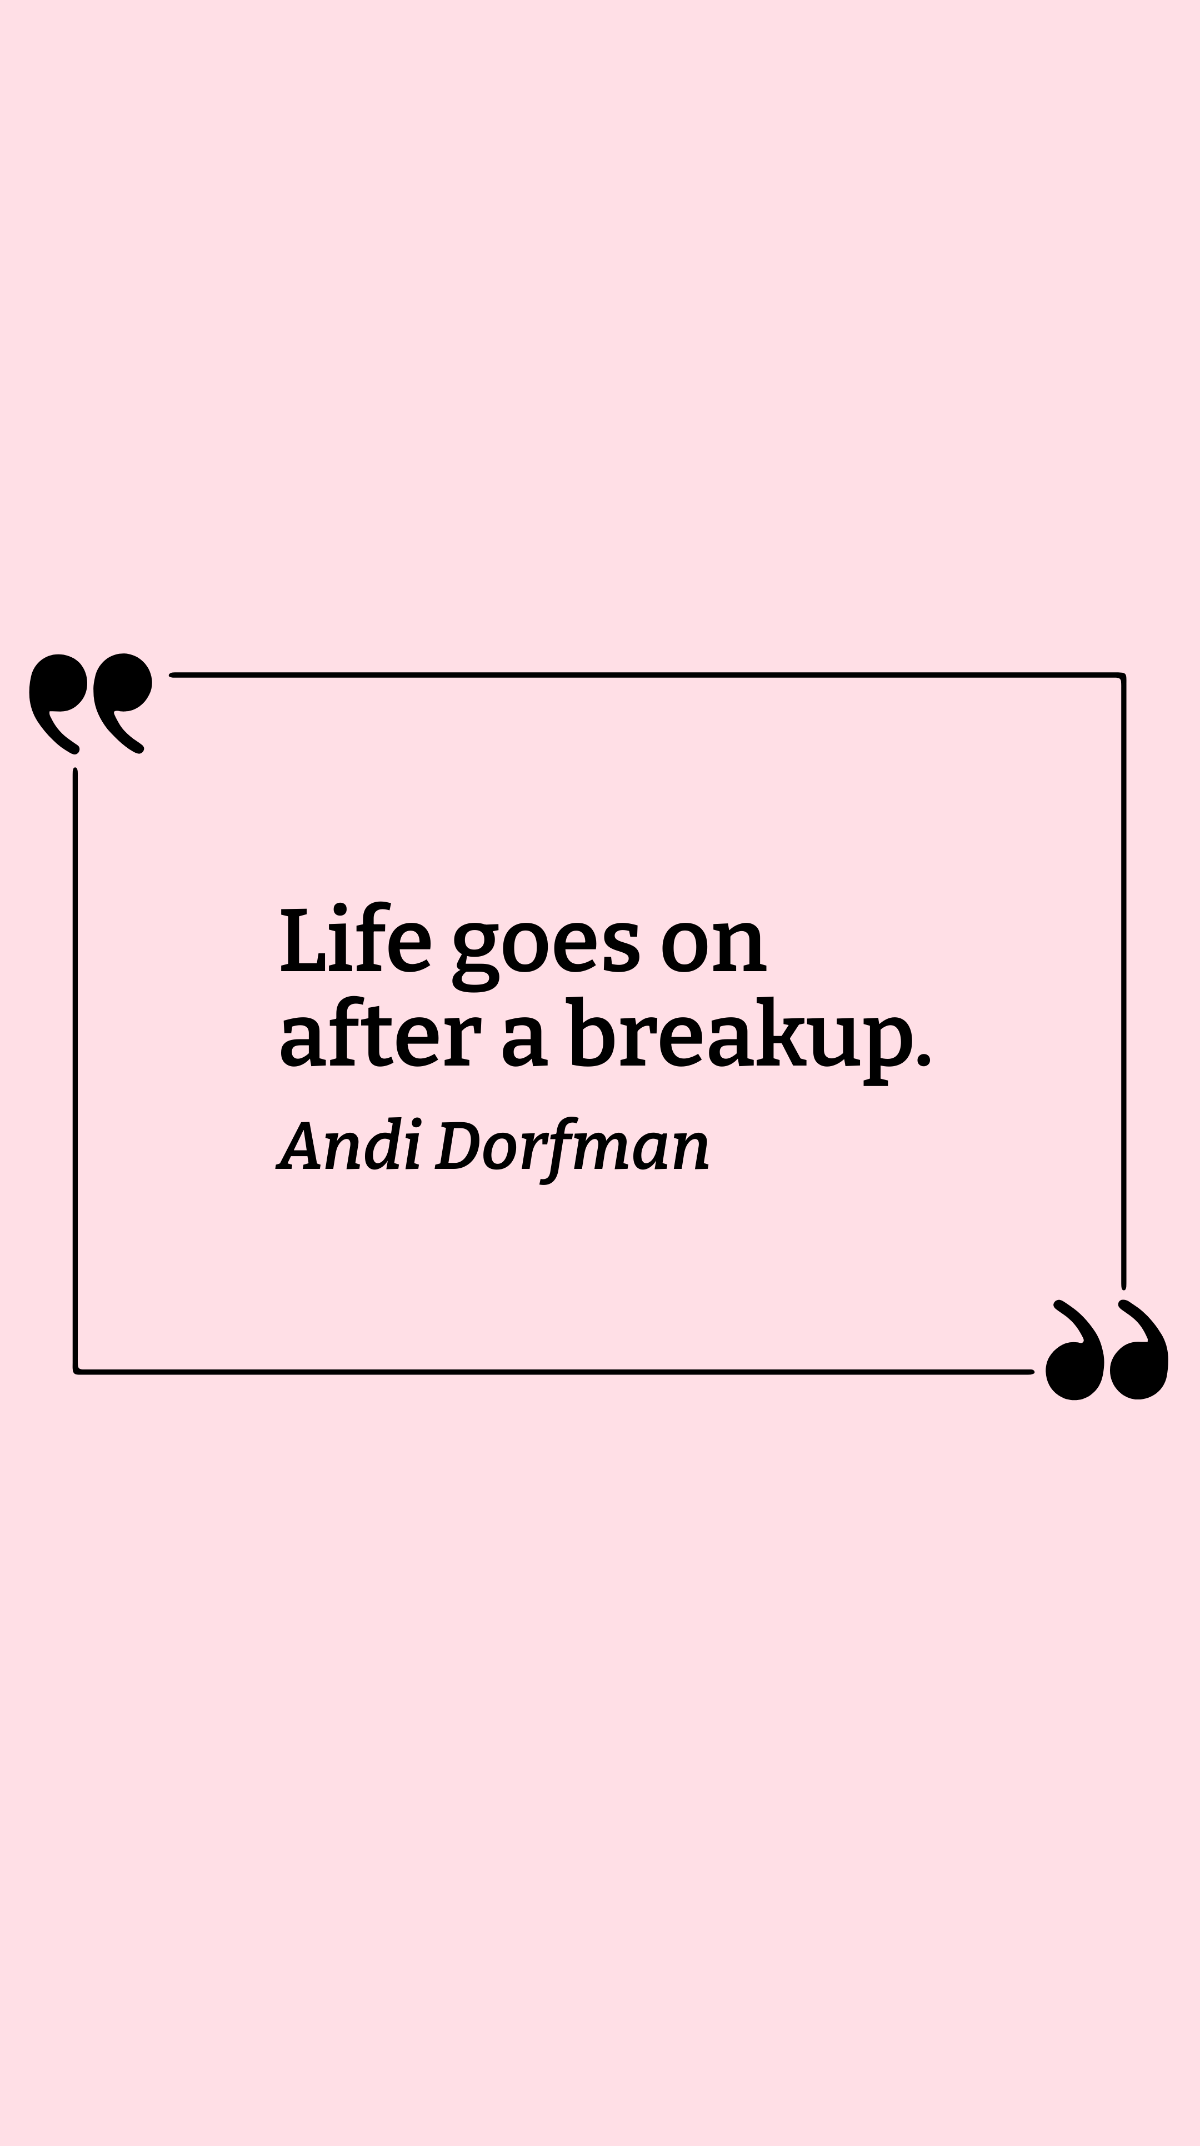 Free Andi Dorfman - Life goes on after a breakup. Template